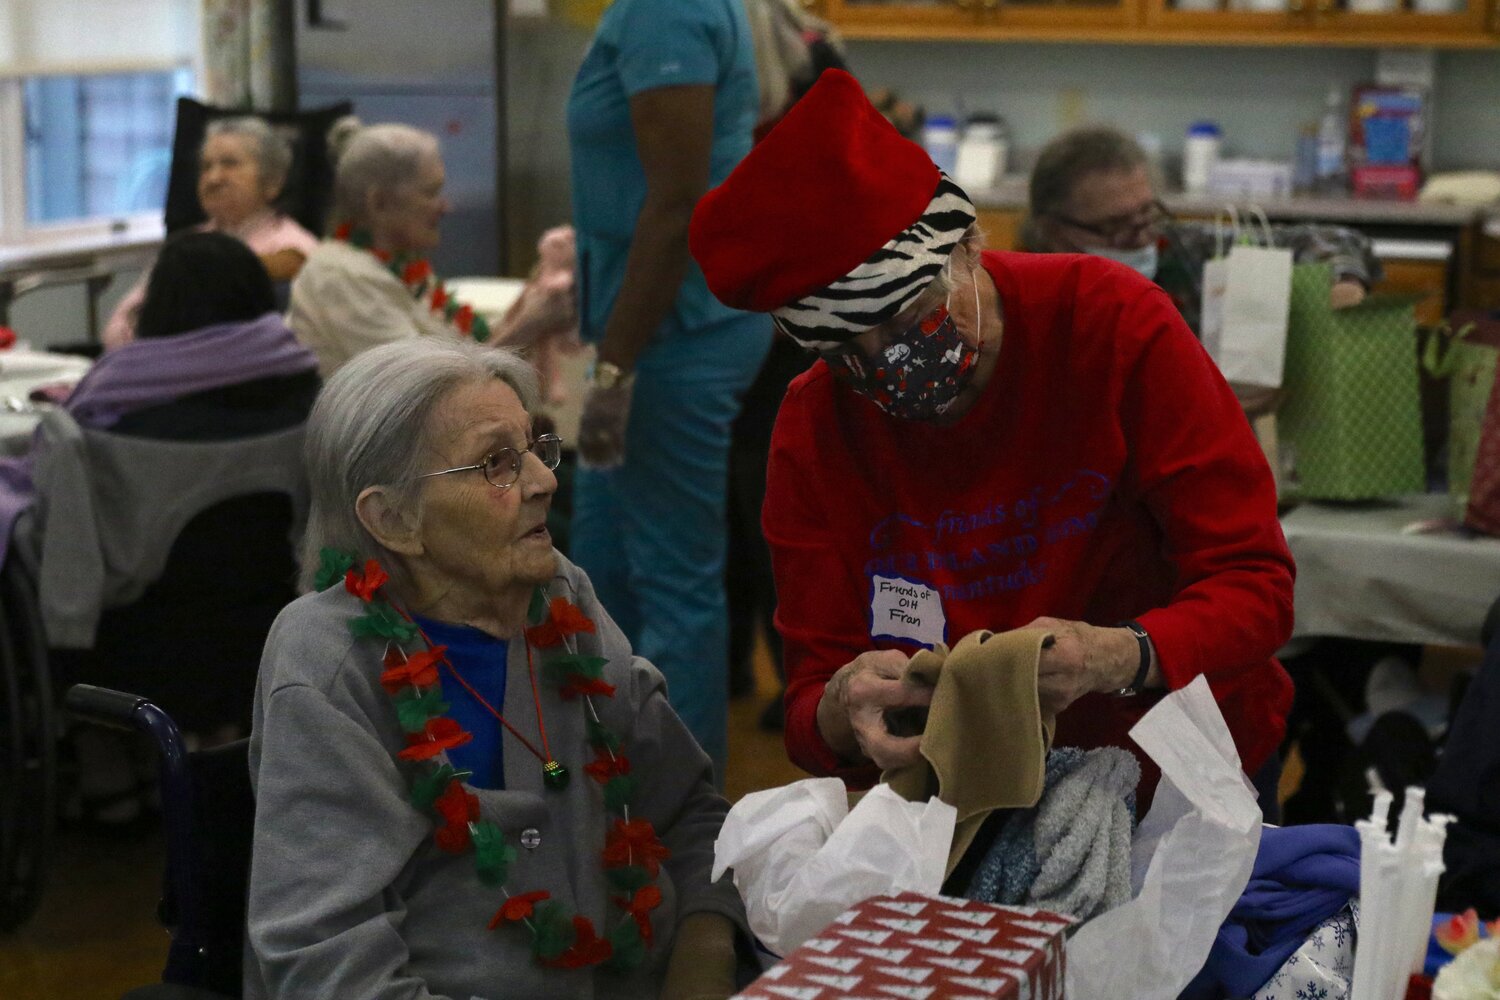 Our Island Home residents open Christmas gifts Thursday.